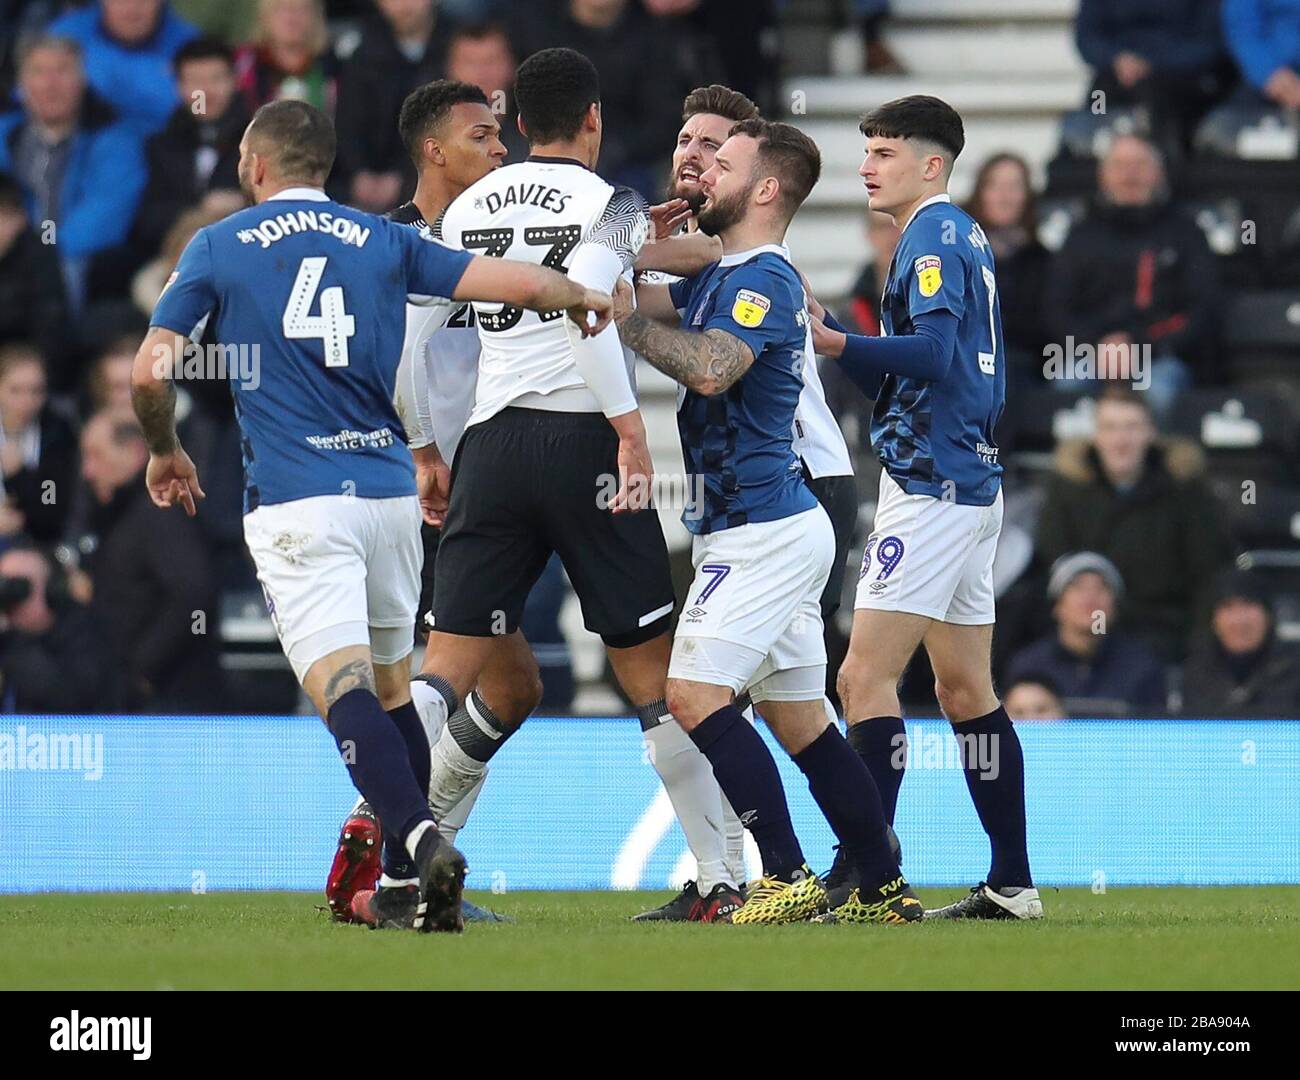 Derby County's Curtis Davies confronts Blackburn Rovers' John Buckley after a dangerous tackle Stock Photo